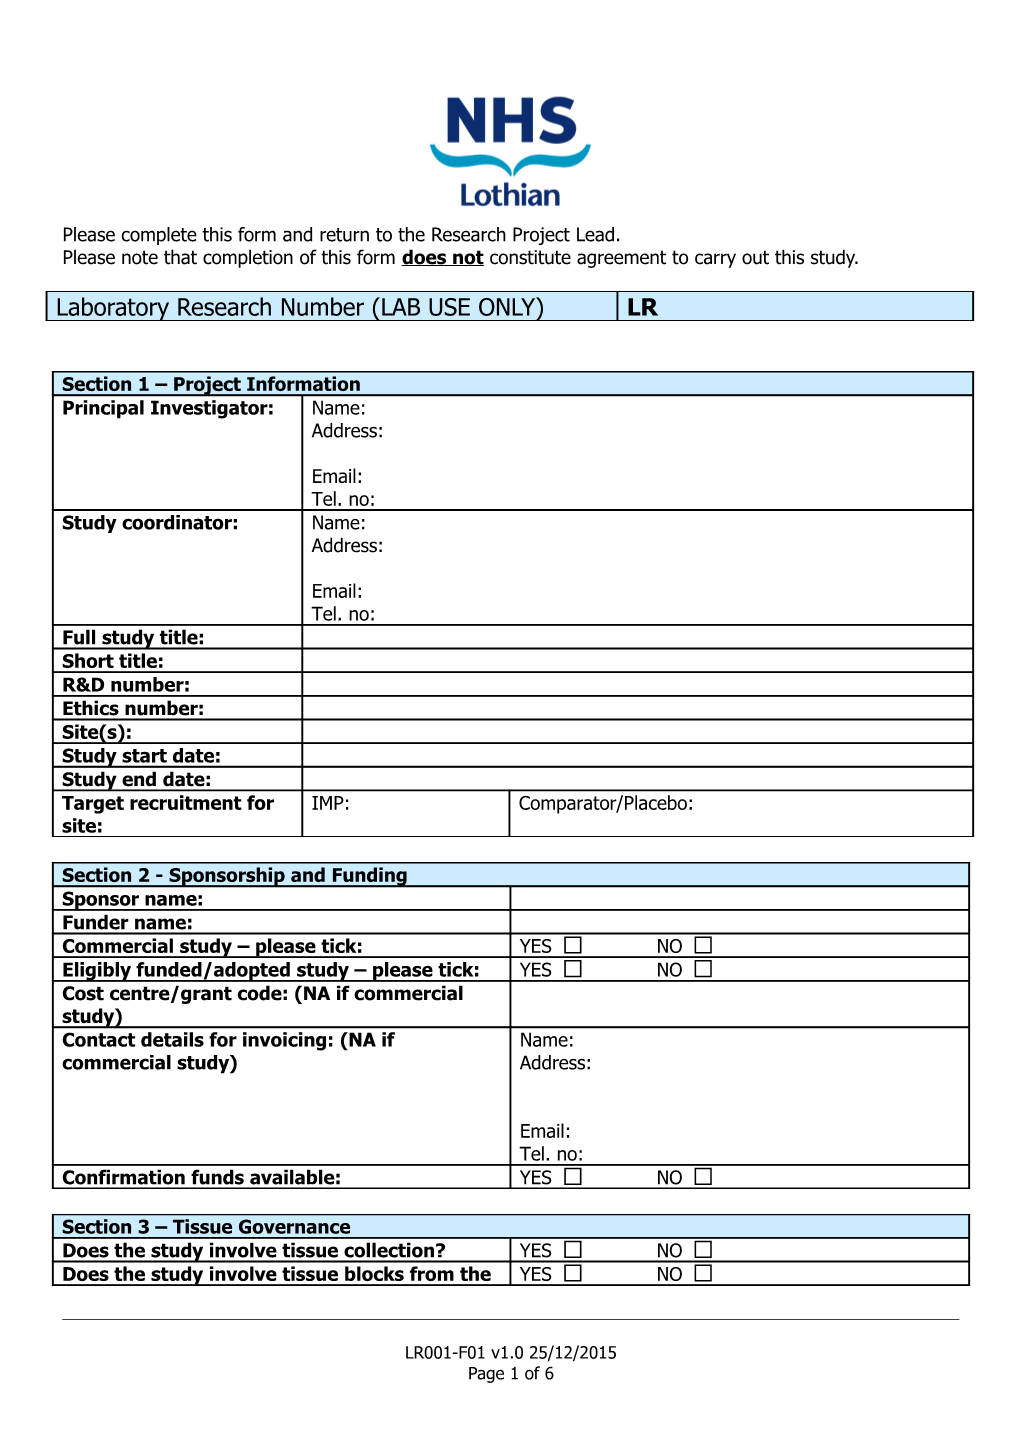 Please Complete This Form and Return to the Research Project Lead